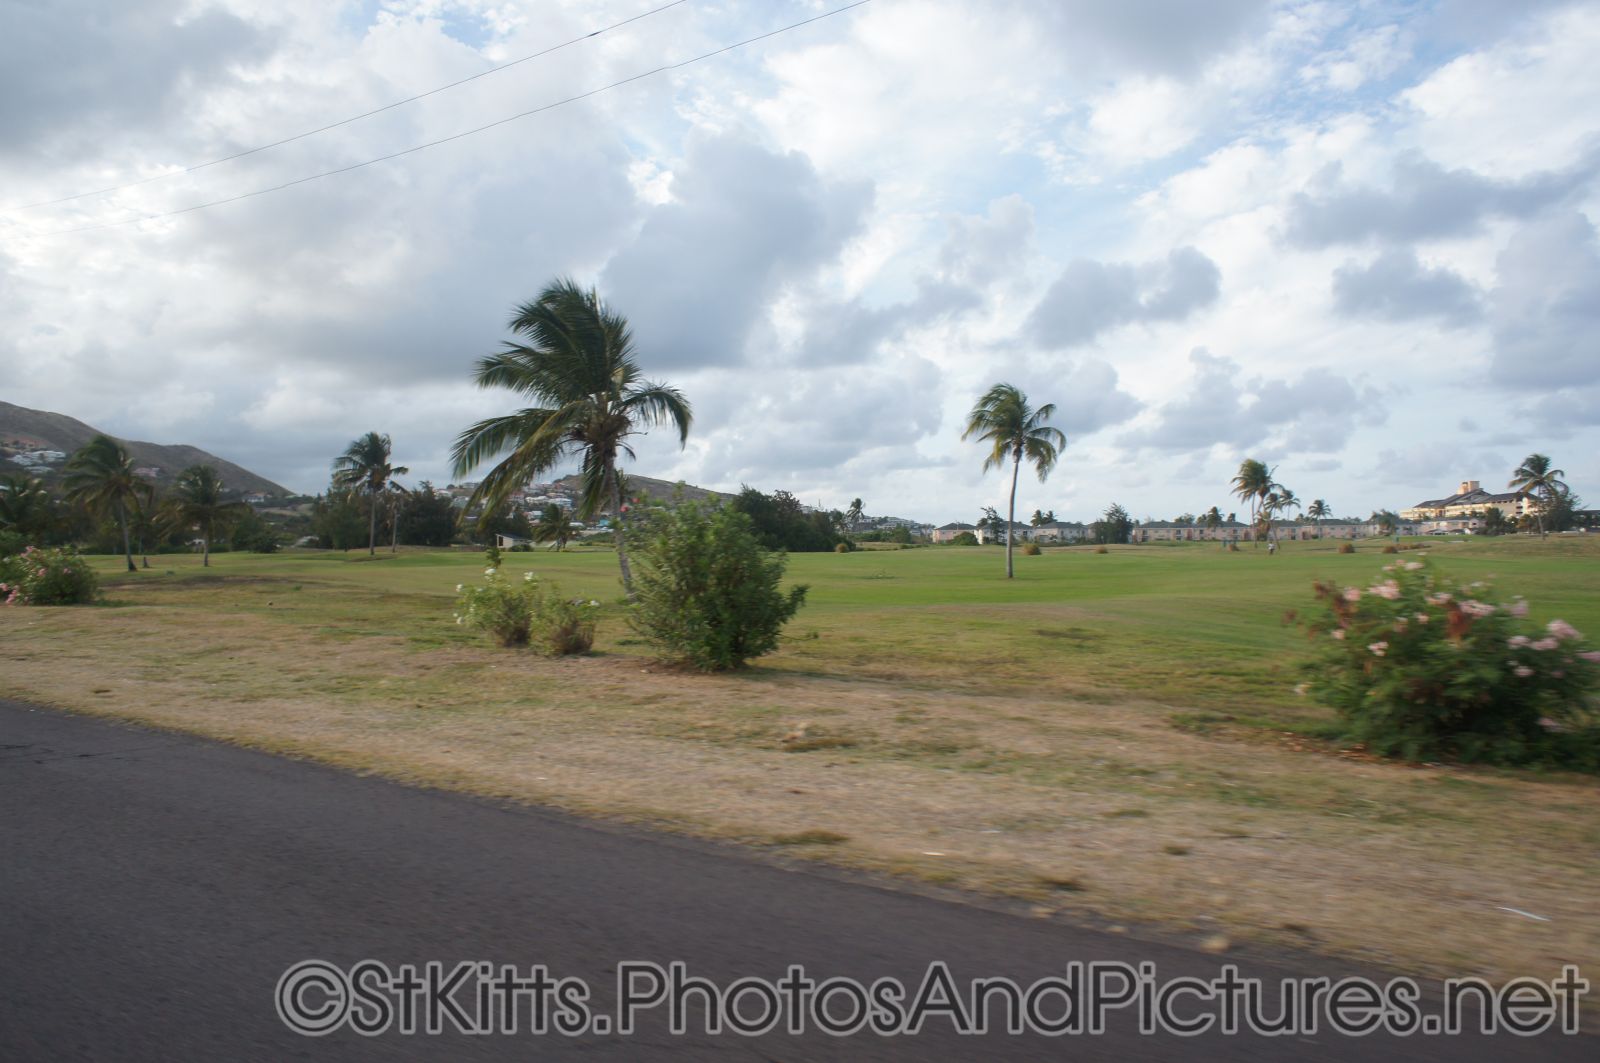 Resort and golf course in St Kitts.jpg
